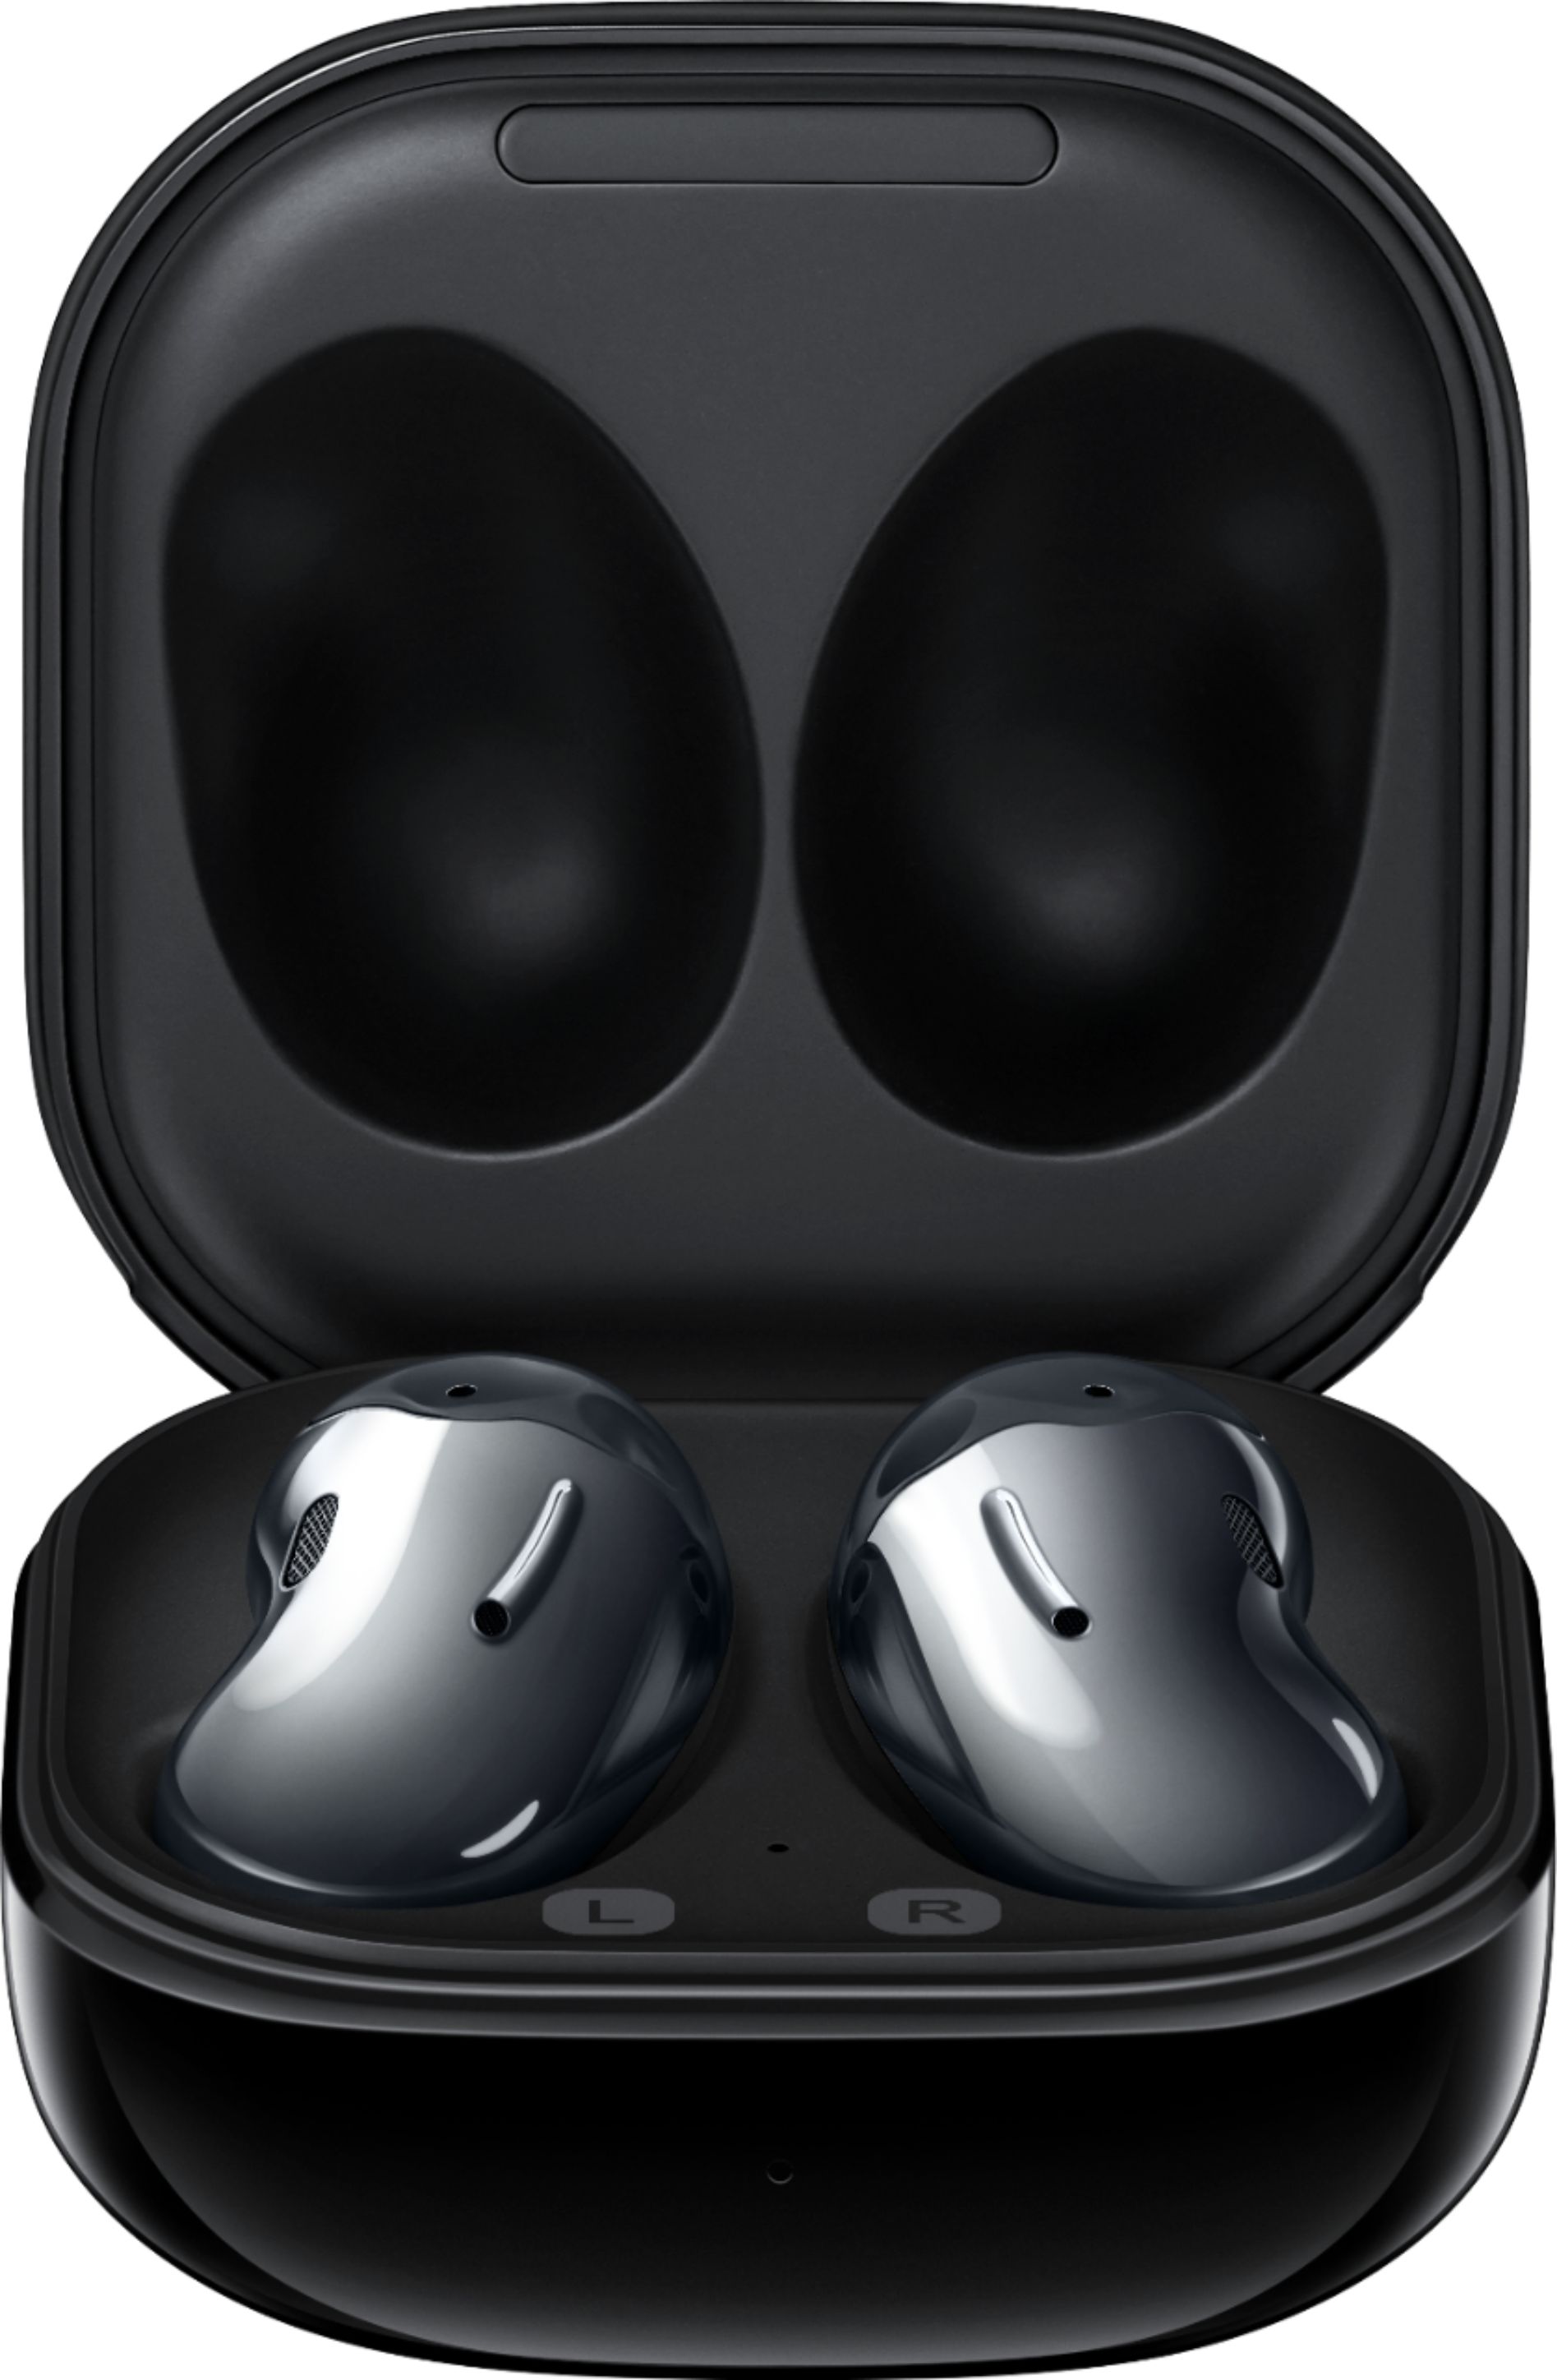 Questions and Answers: Samsung Galaxy Buds Live True Wireless Earbud ...